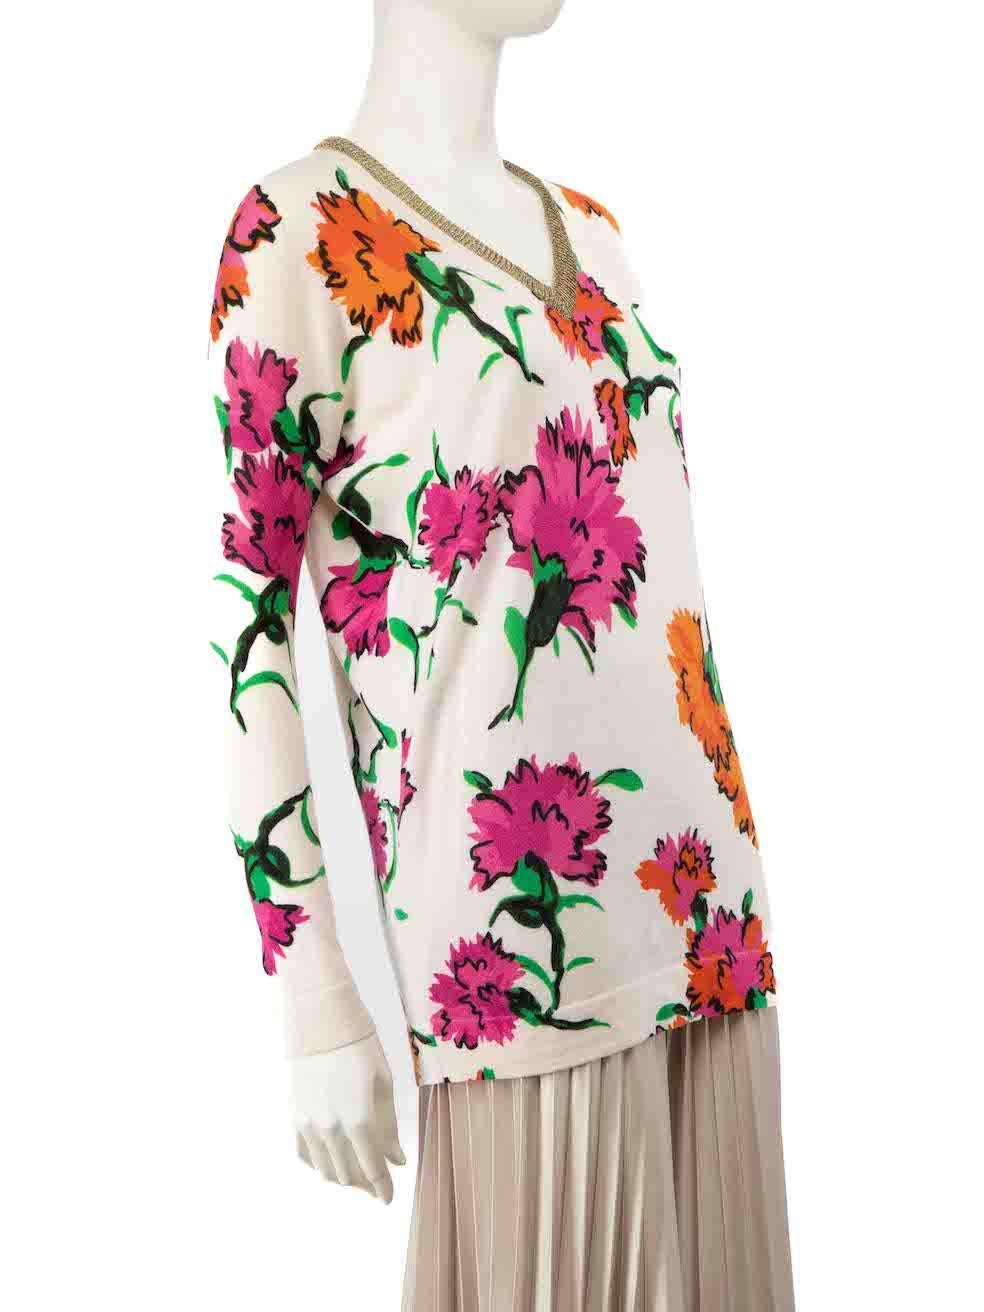 CONDITION is Good. General wear to jumper is evident. Moderate signs of discoloured marks to overall material especially to the neckline and cuffs on this used Escada designer resale item.
 
 
 
 Details
 
 
 Multicolour - Cream, pink and gold
 
